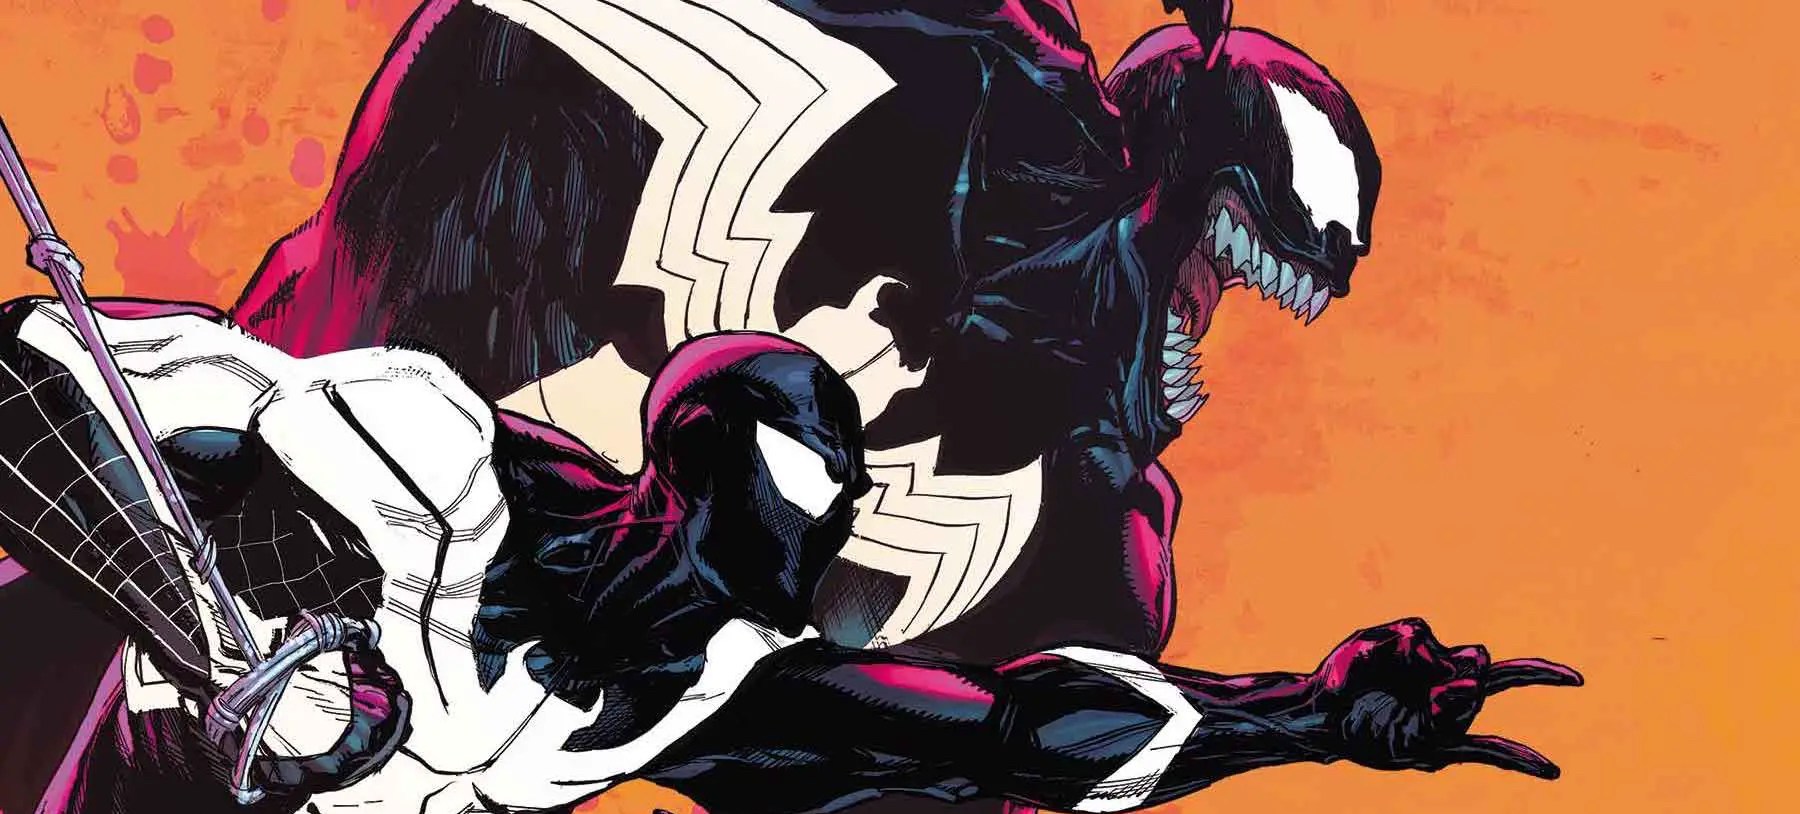 'Extreme Venomverse' #1 is about Spidey, family, and samurai